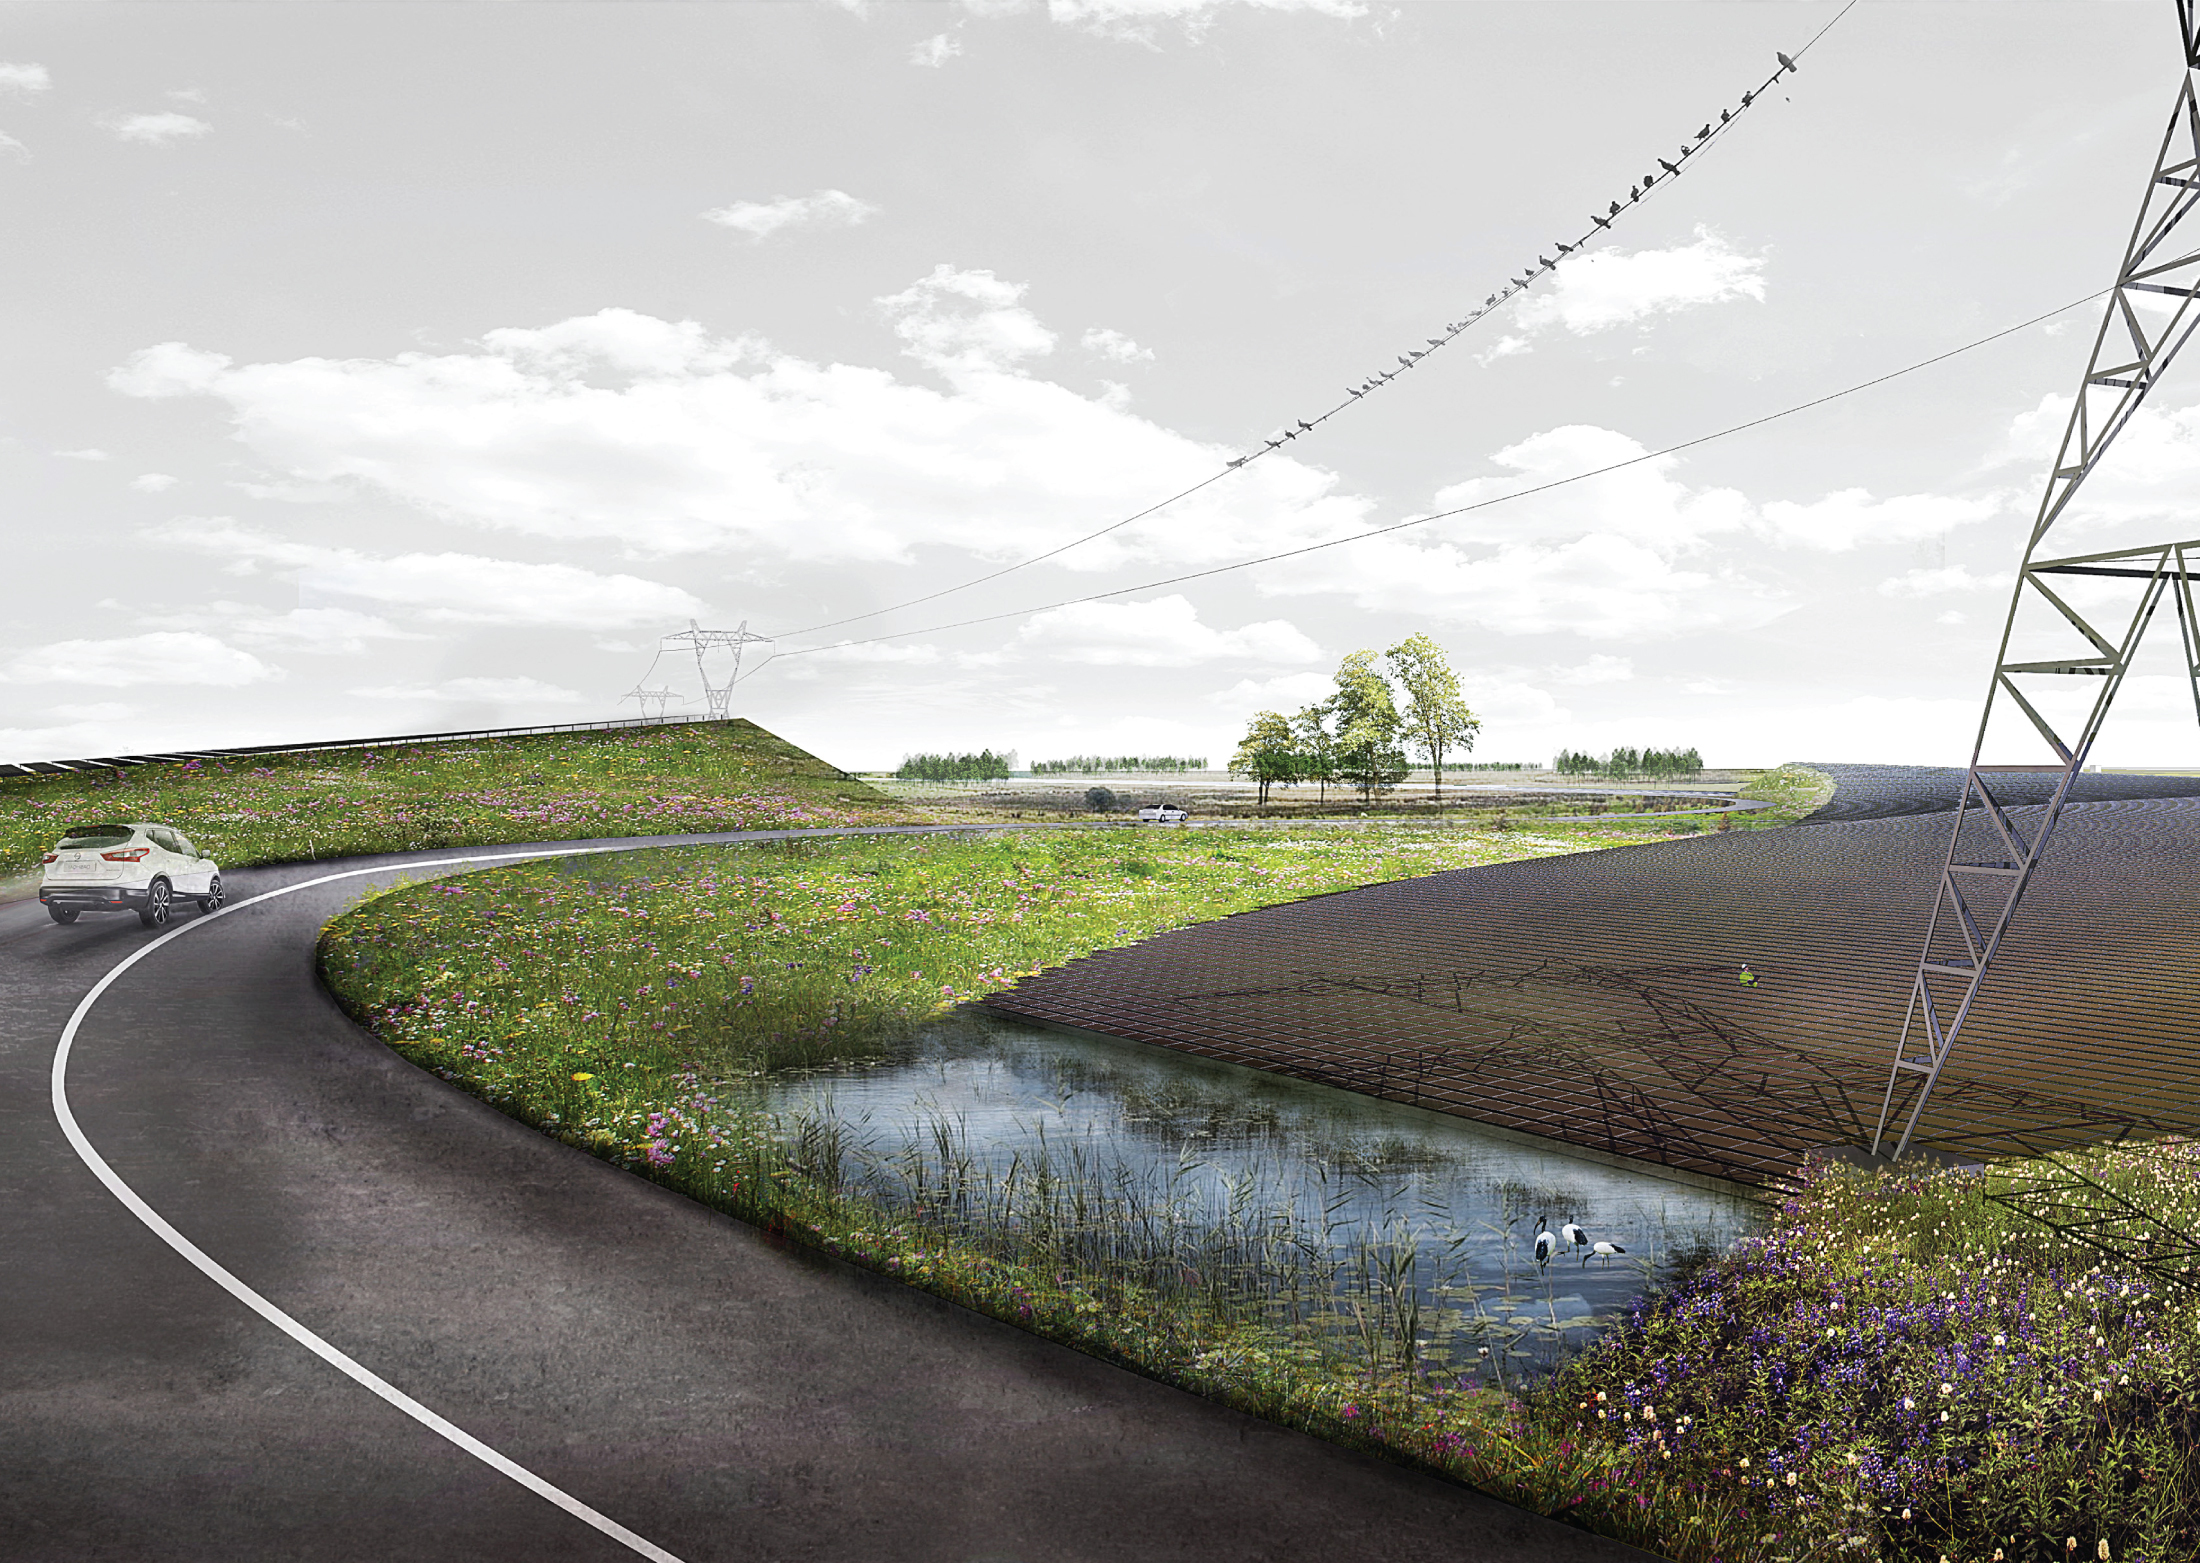 Phase 2: impression of the solar landscape in the Holsloot junction 